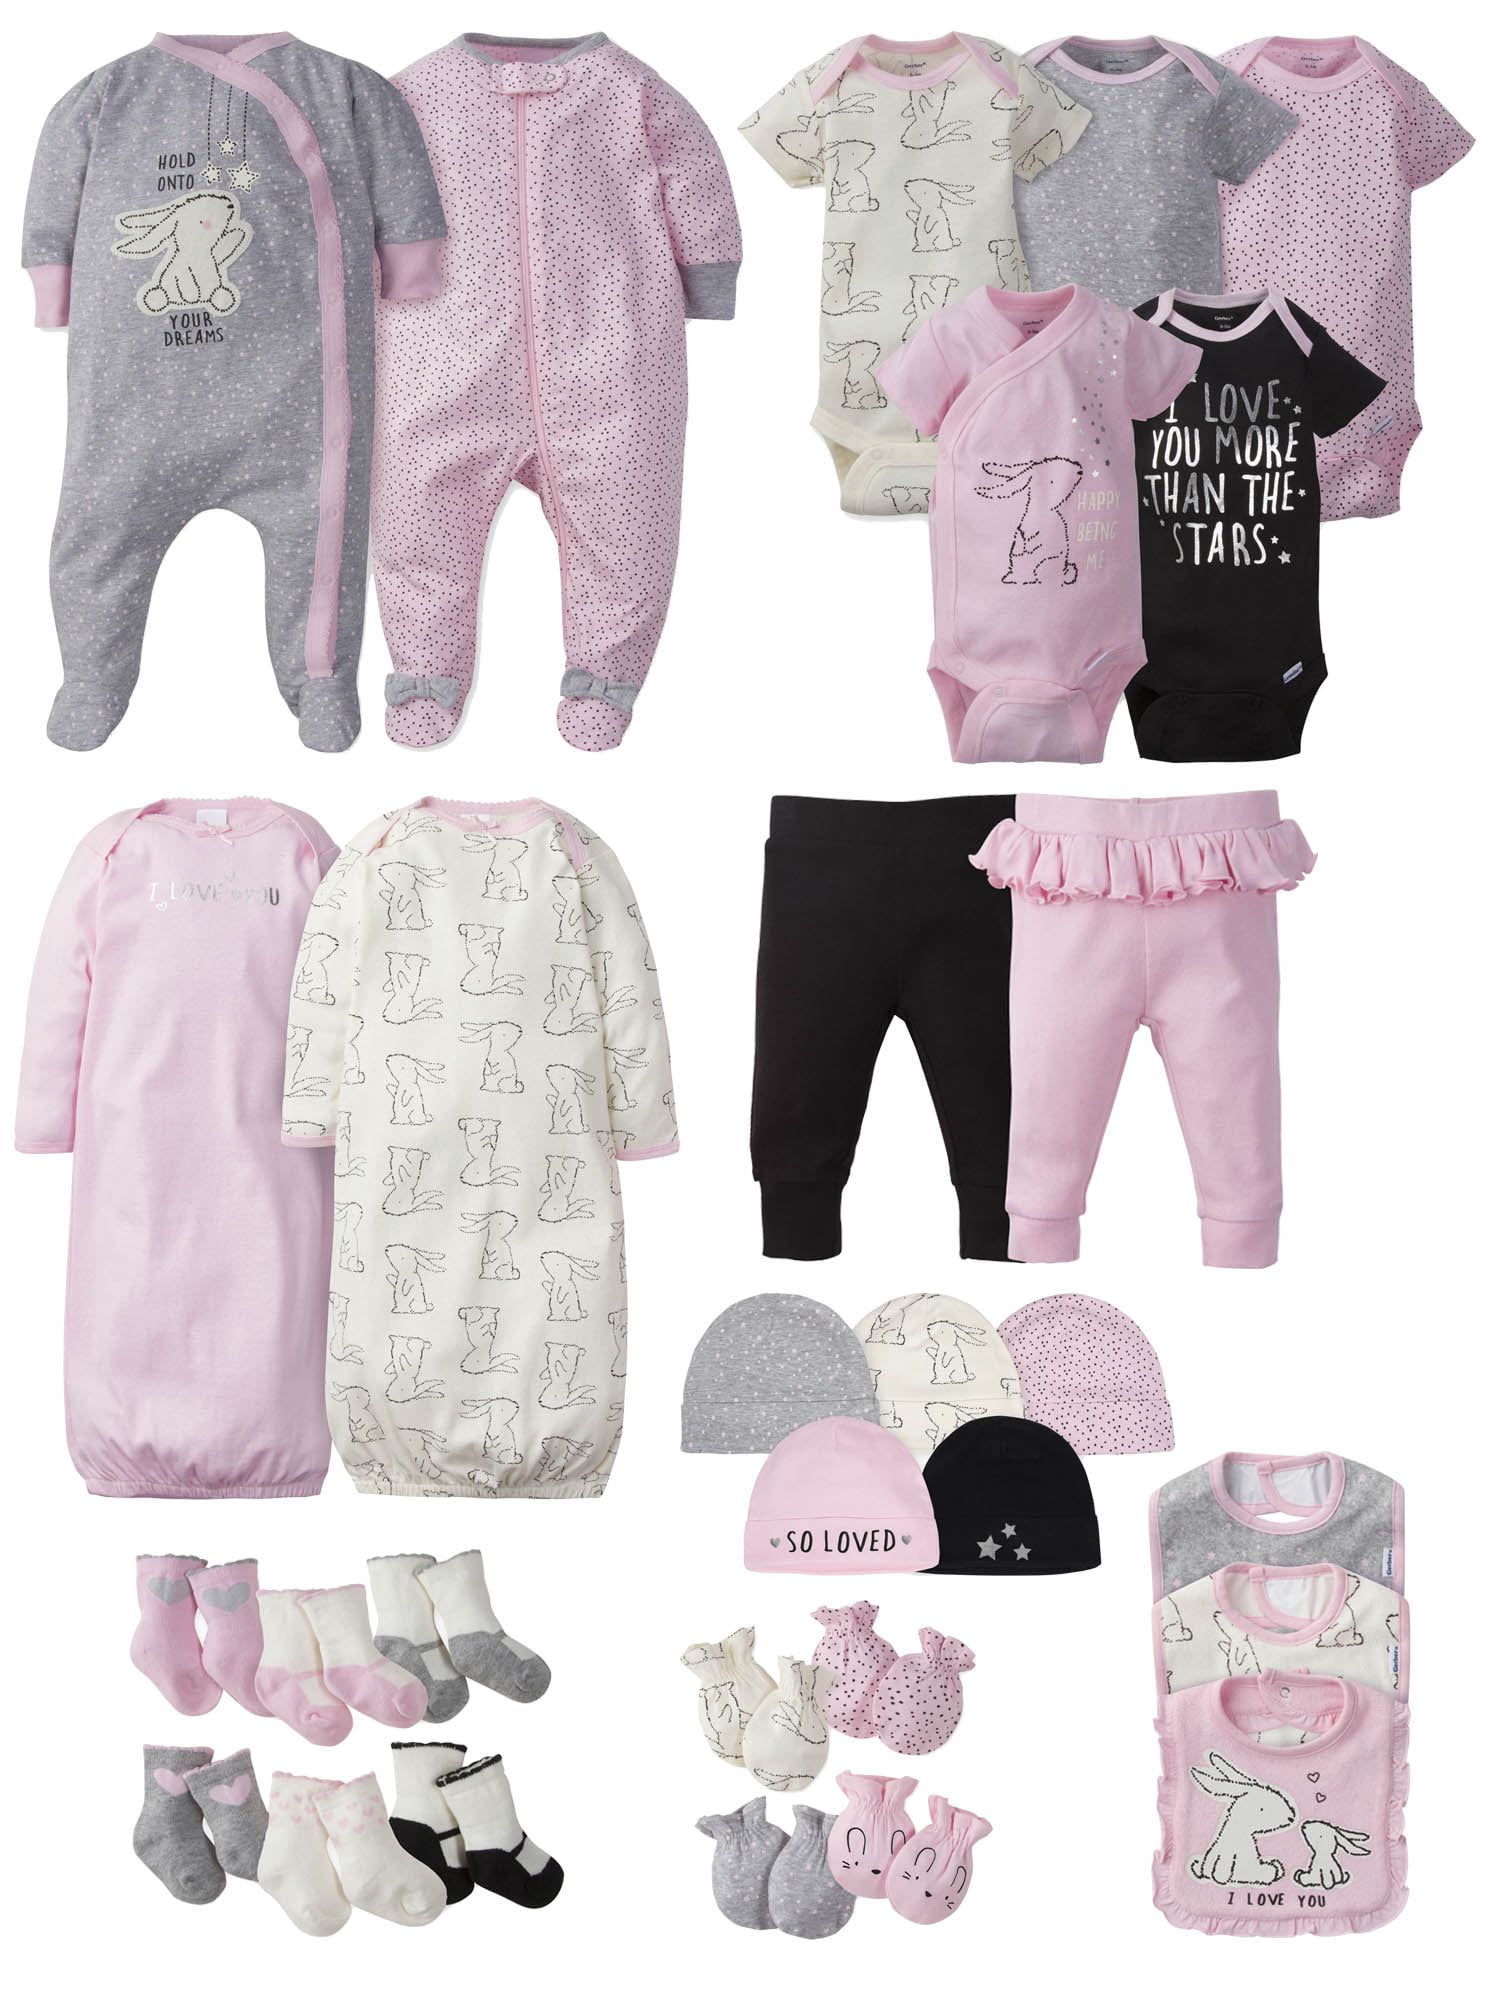 Pants and Cap Baby Shower Gift Baby Clothes GERBER BABY GIRL 3-Piece Set Onesie